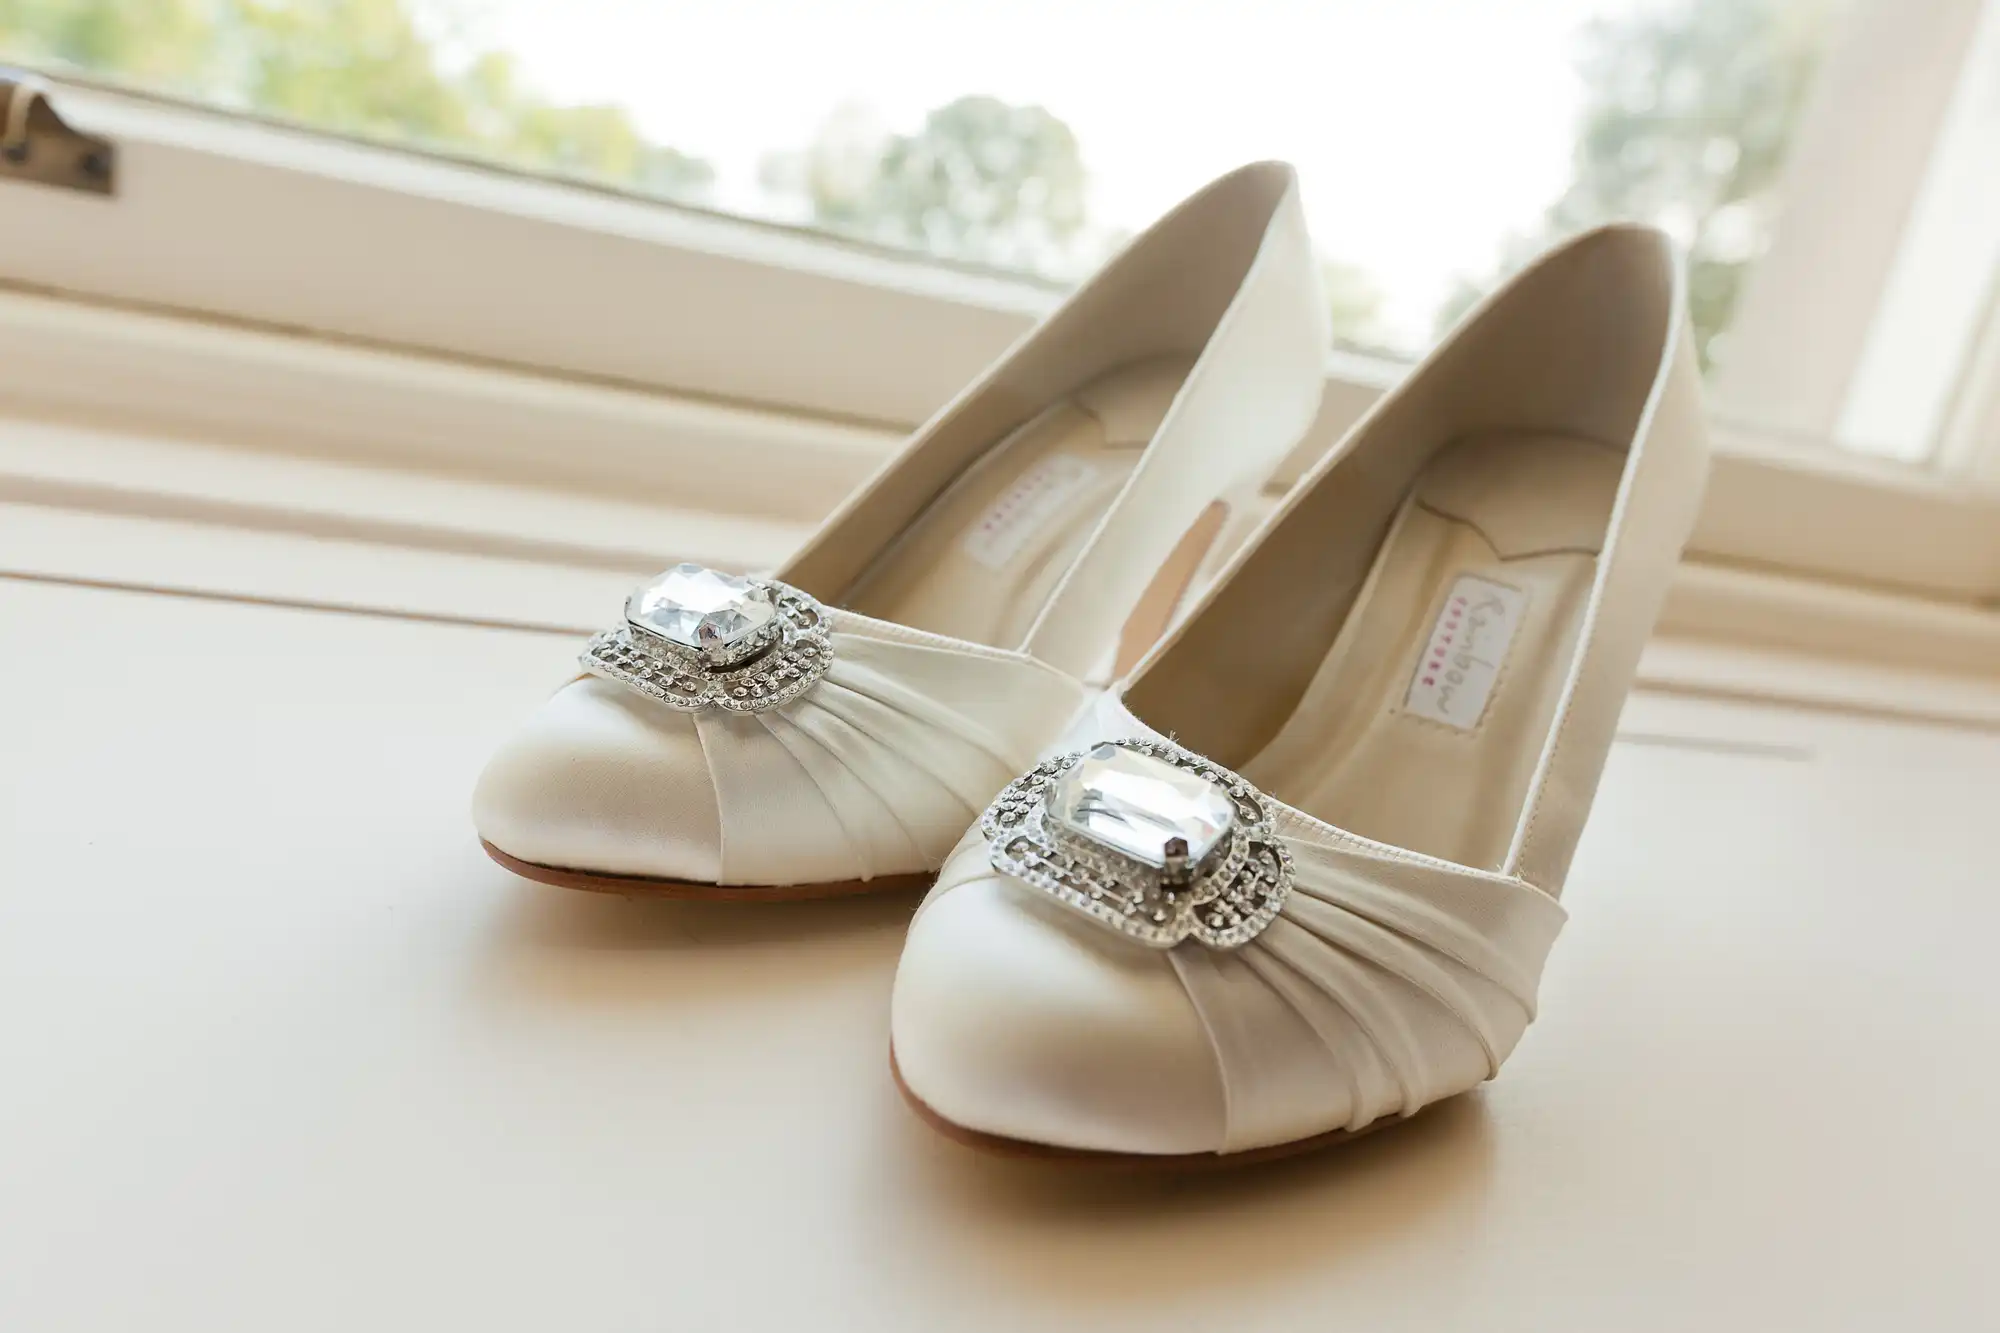 A pair of elegant white bridal shoes with rhinestone embellishments, placed by a window casting soft natural light.